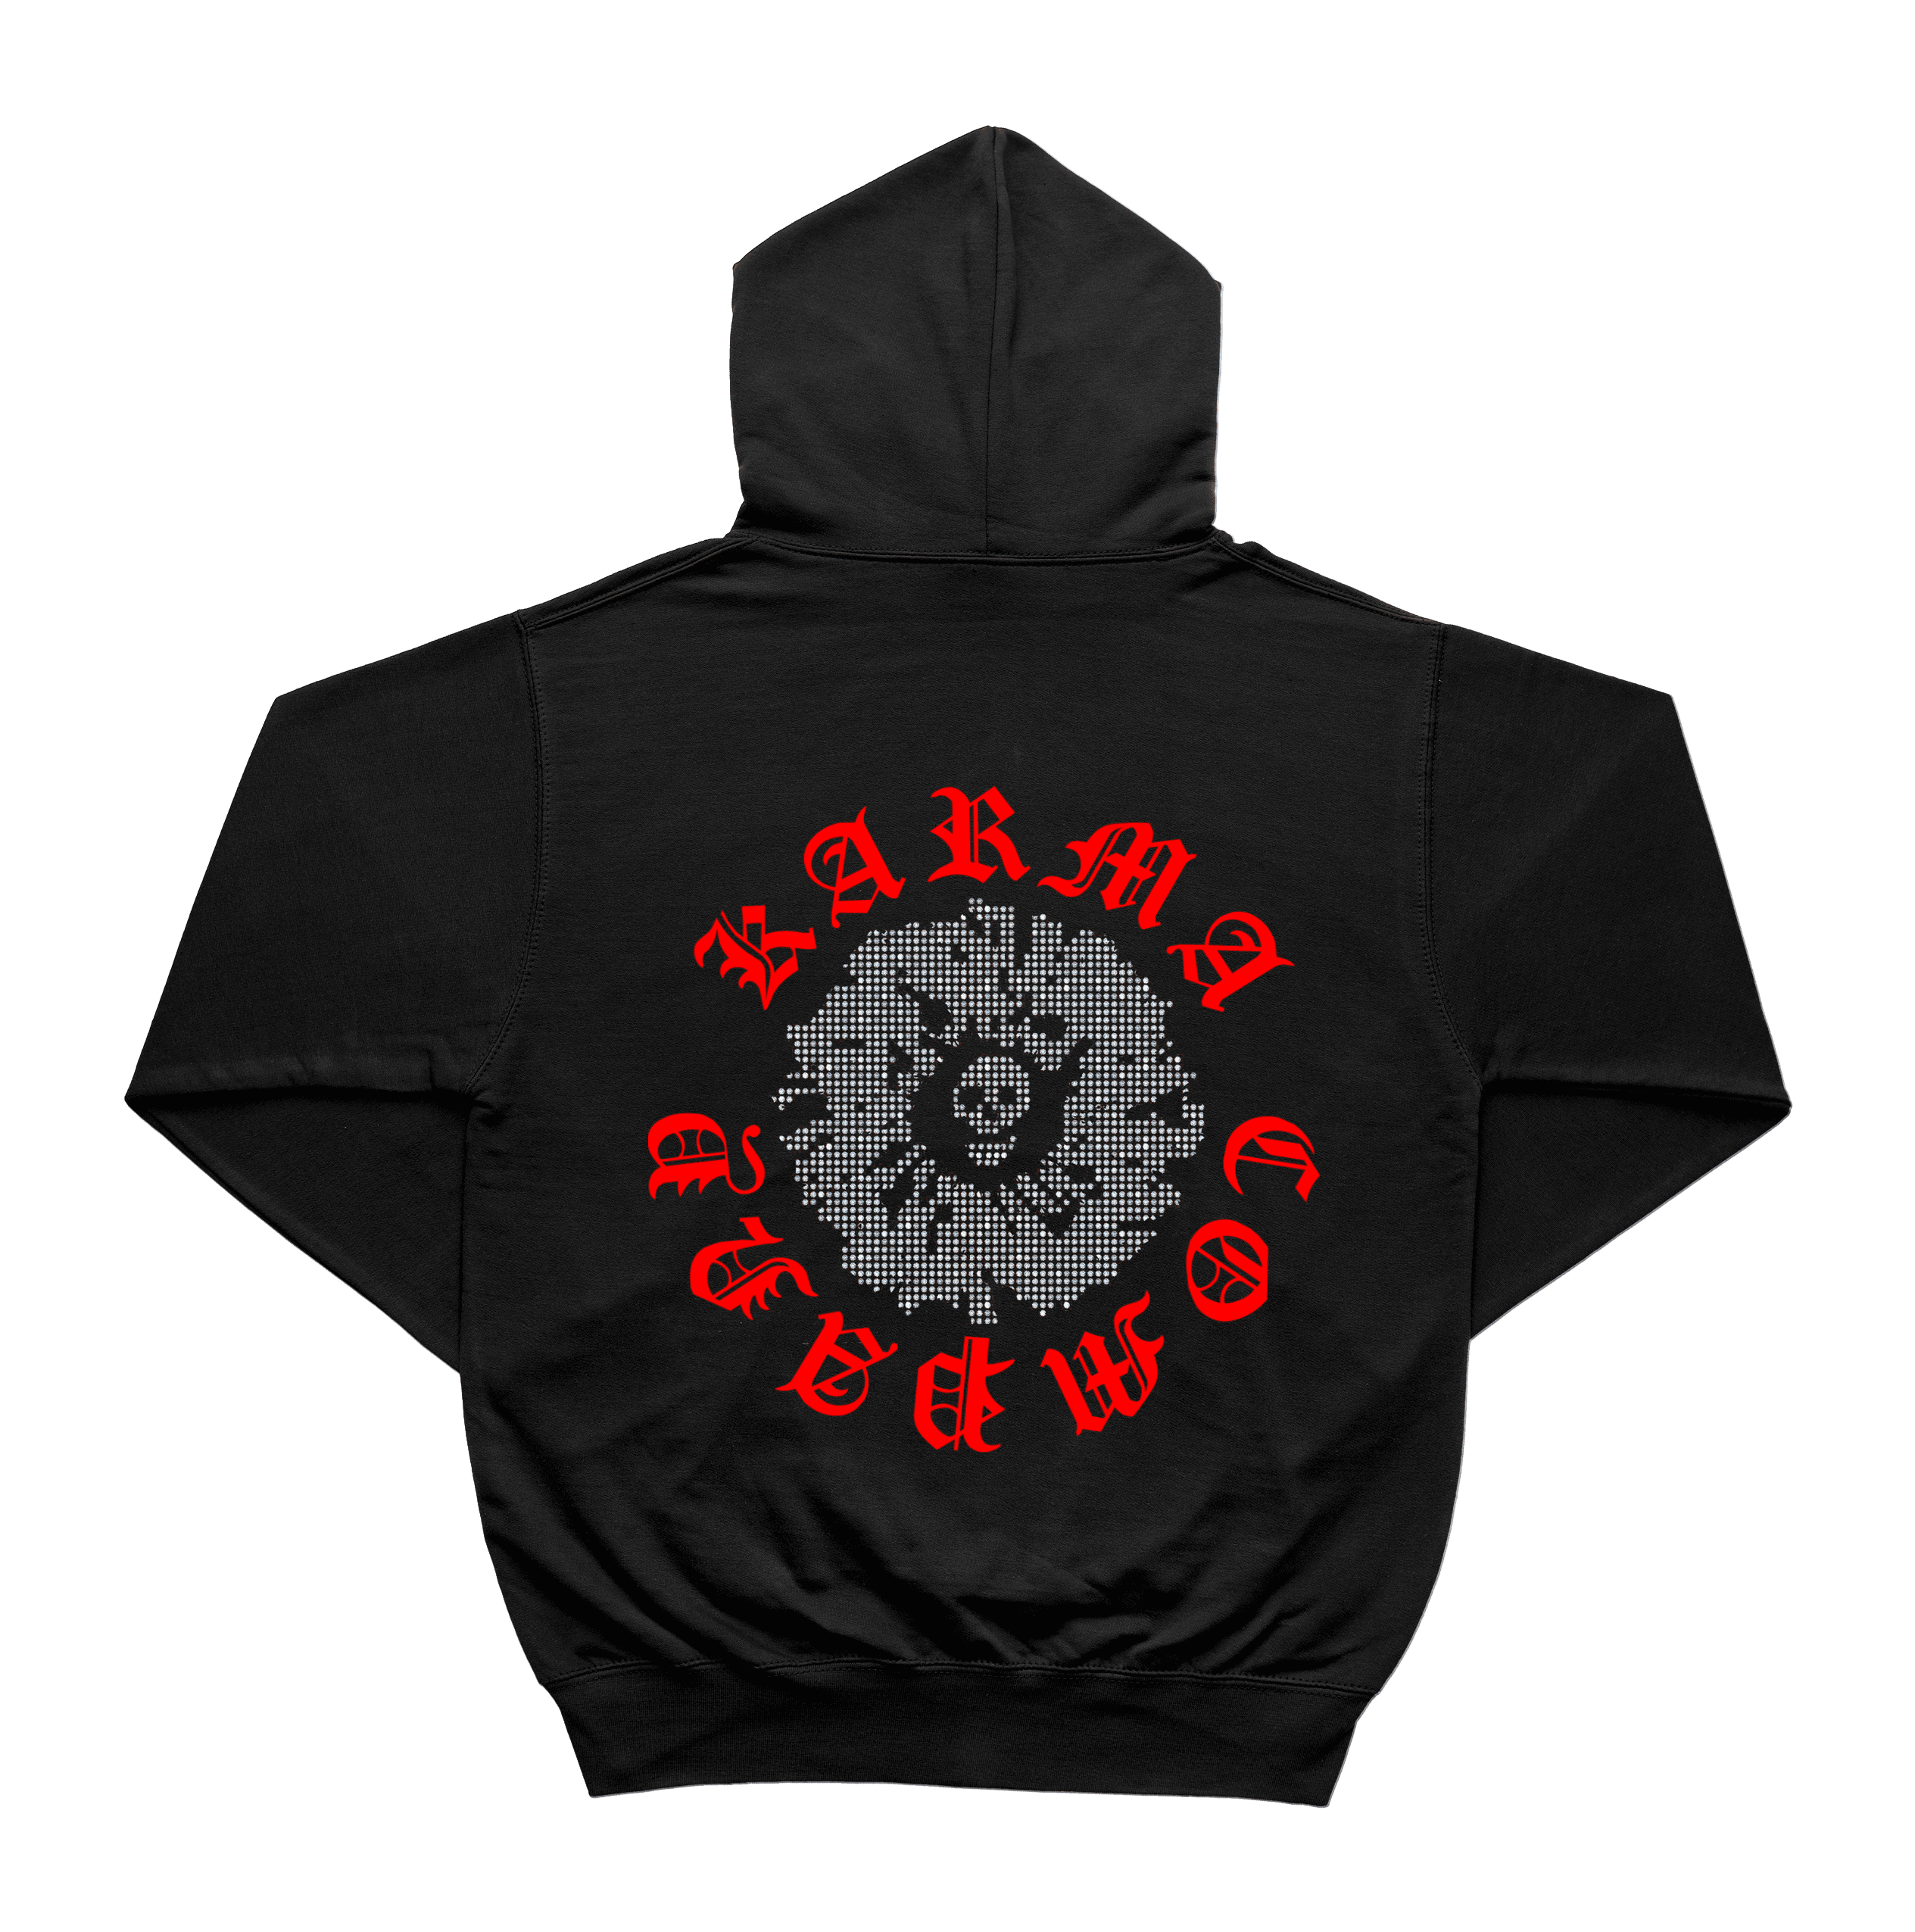 Karma Limited Edition Spark on Eye Hoodie Red